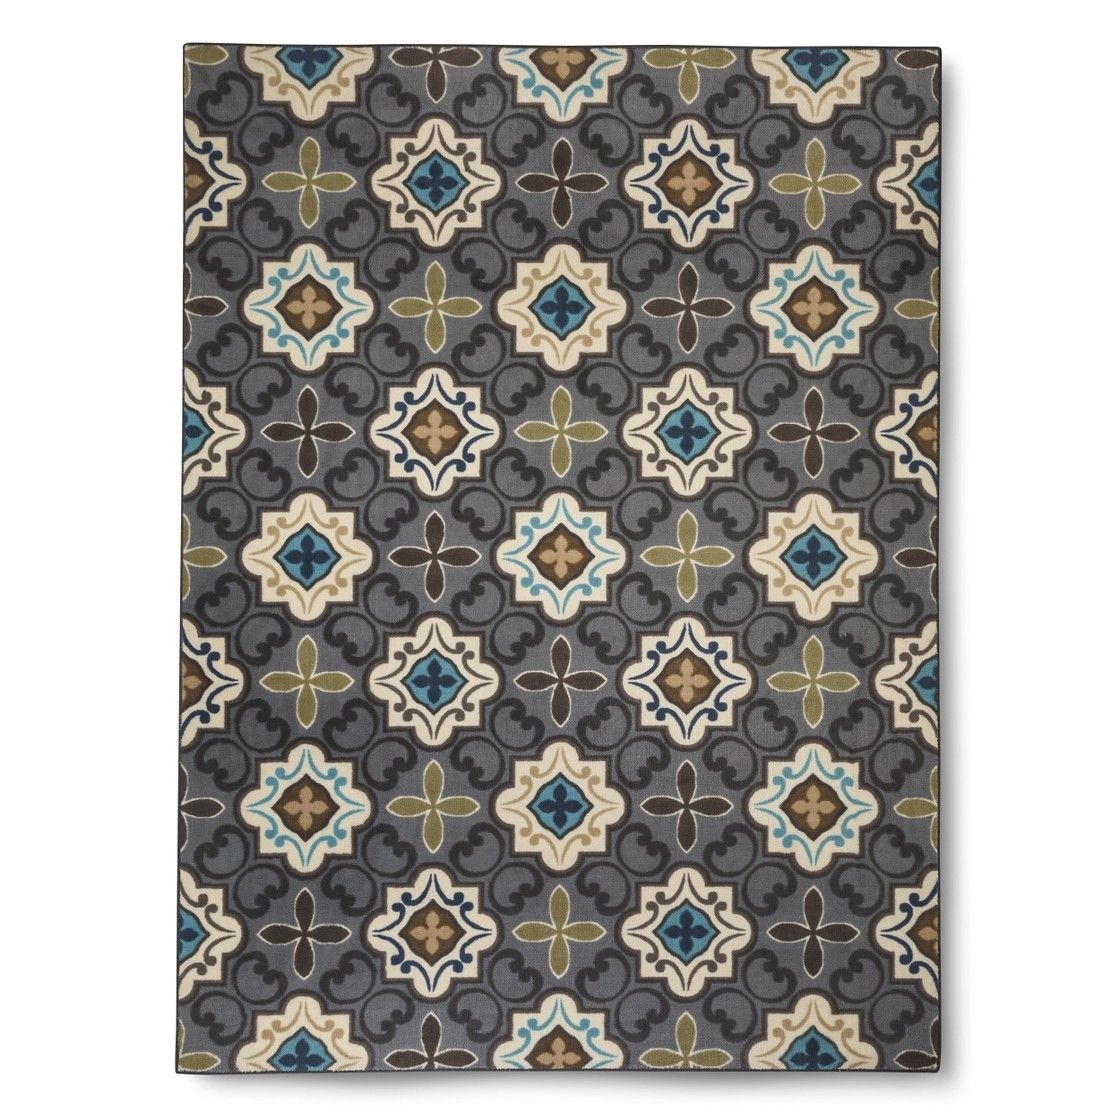 lighter gray in person saw at target for the living room thresholda multi moroccan tile rug